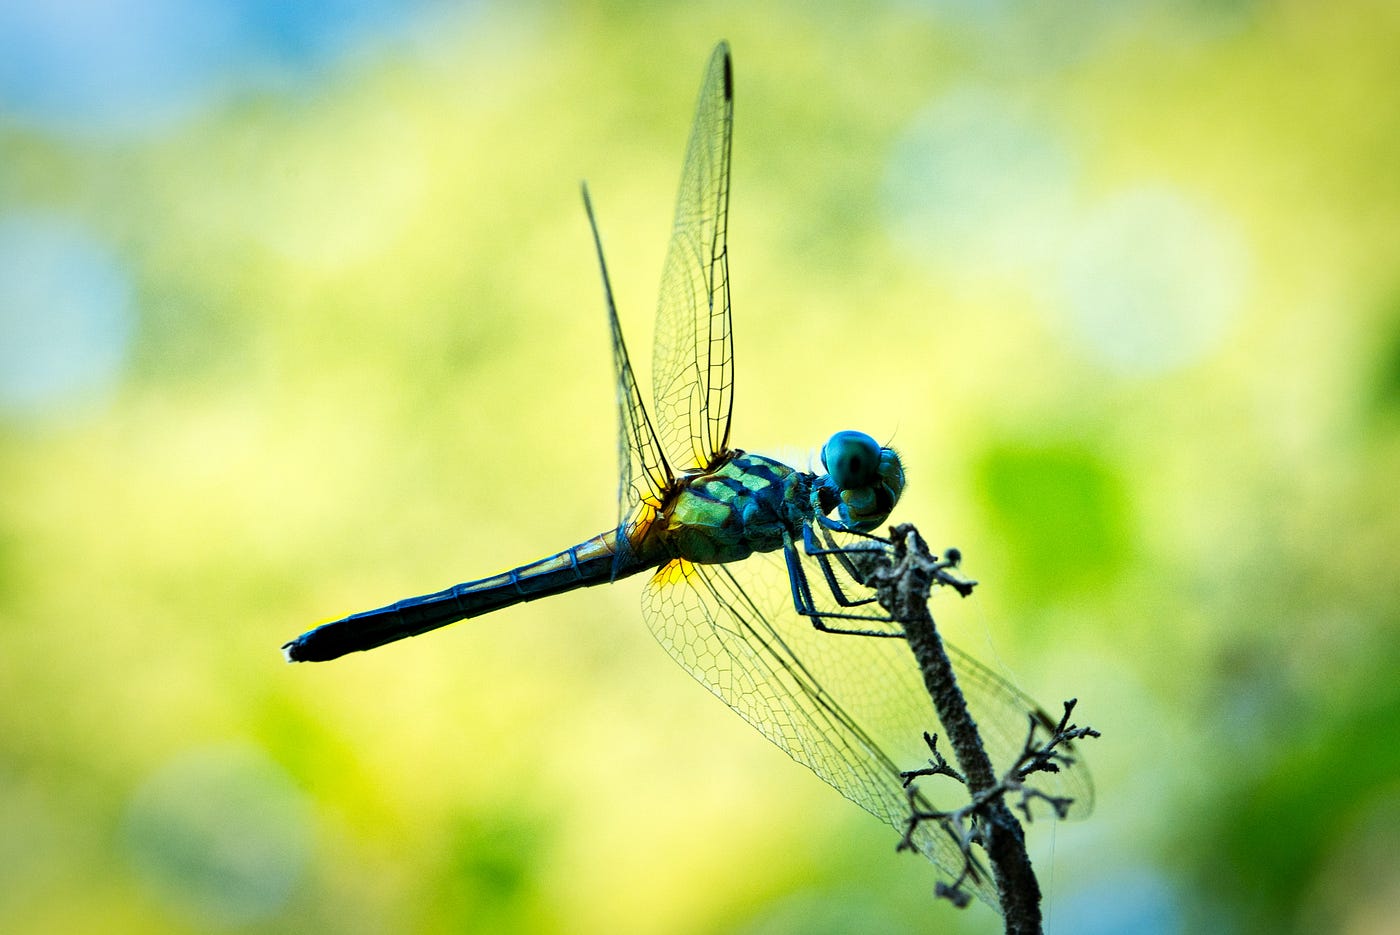 The Hidden Spiritual Message Behind Seeing A Dragonfly